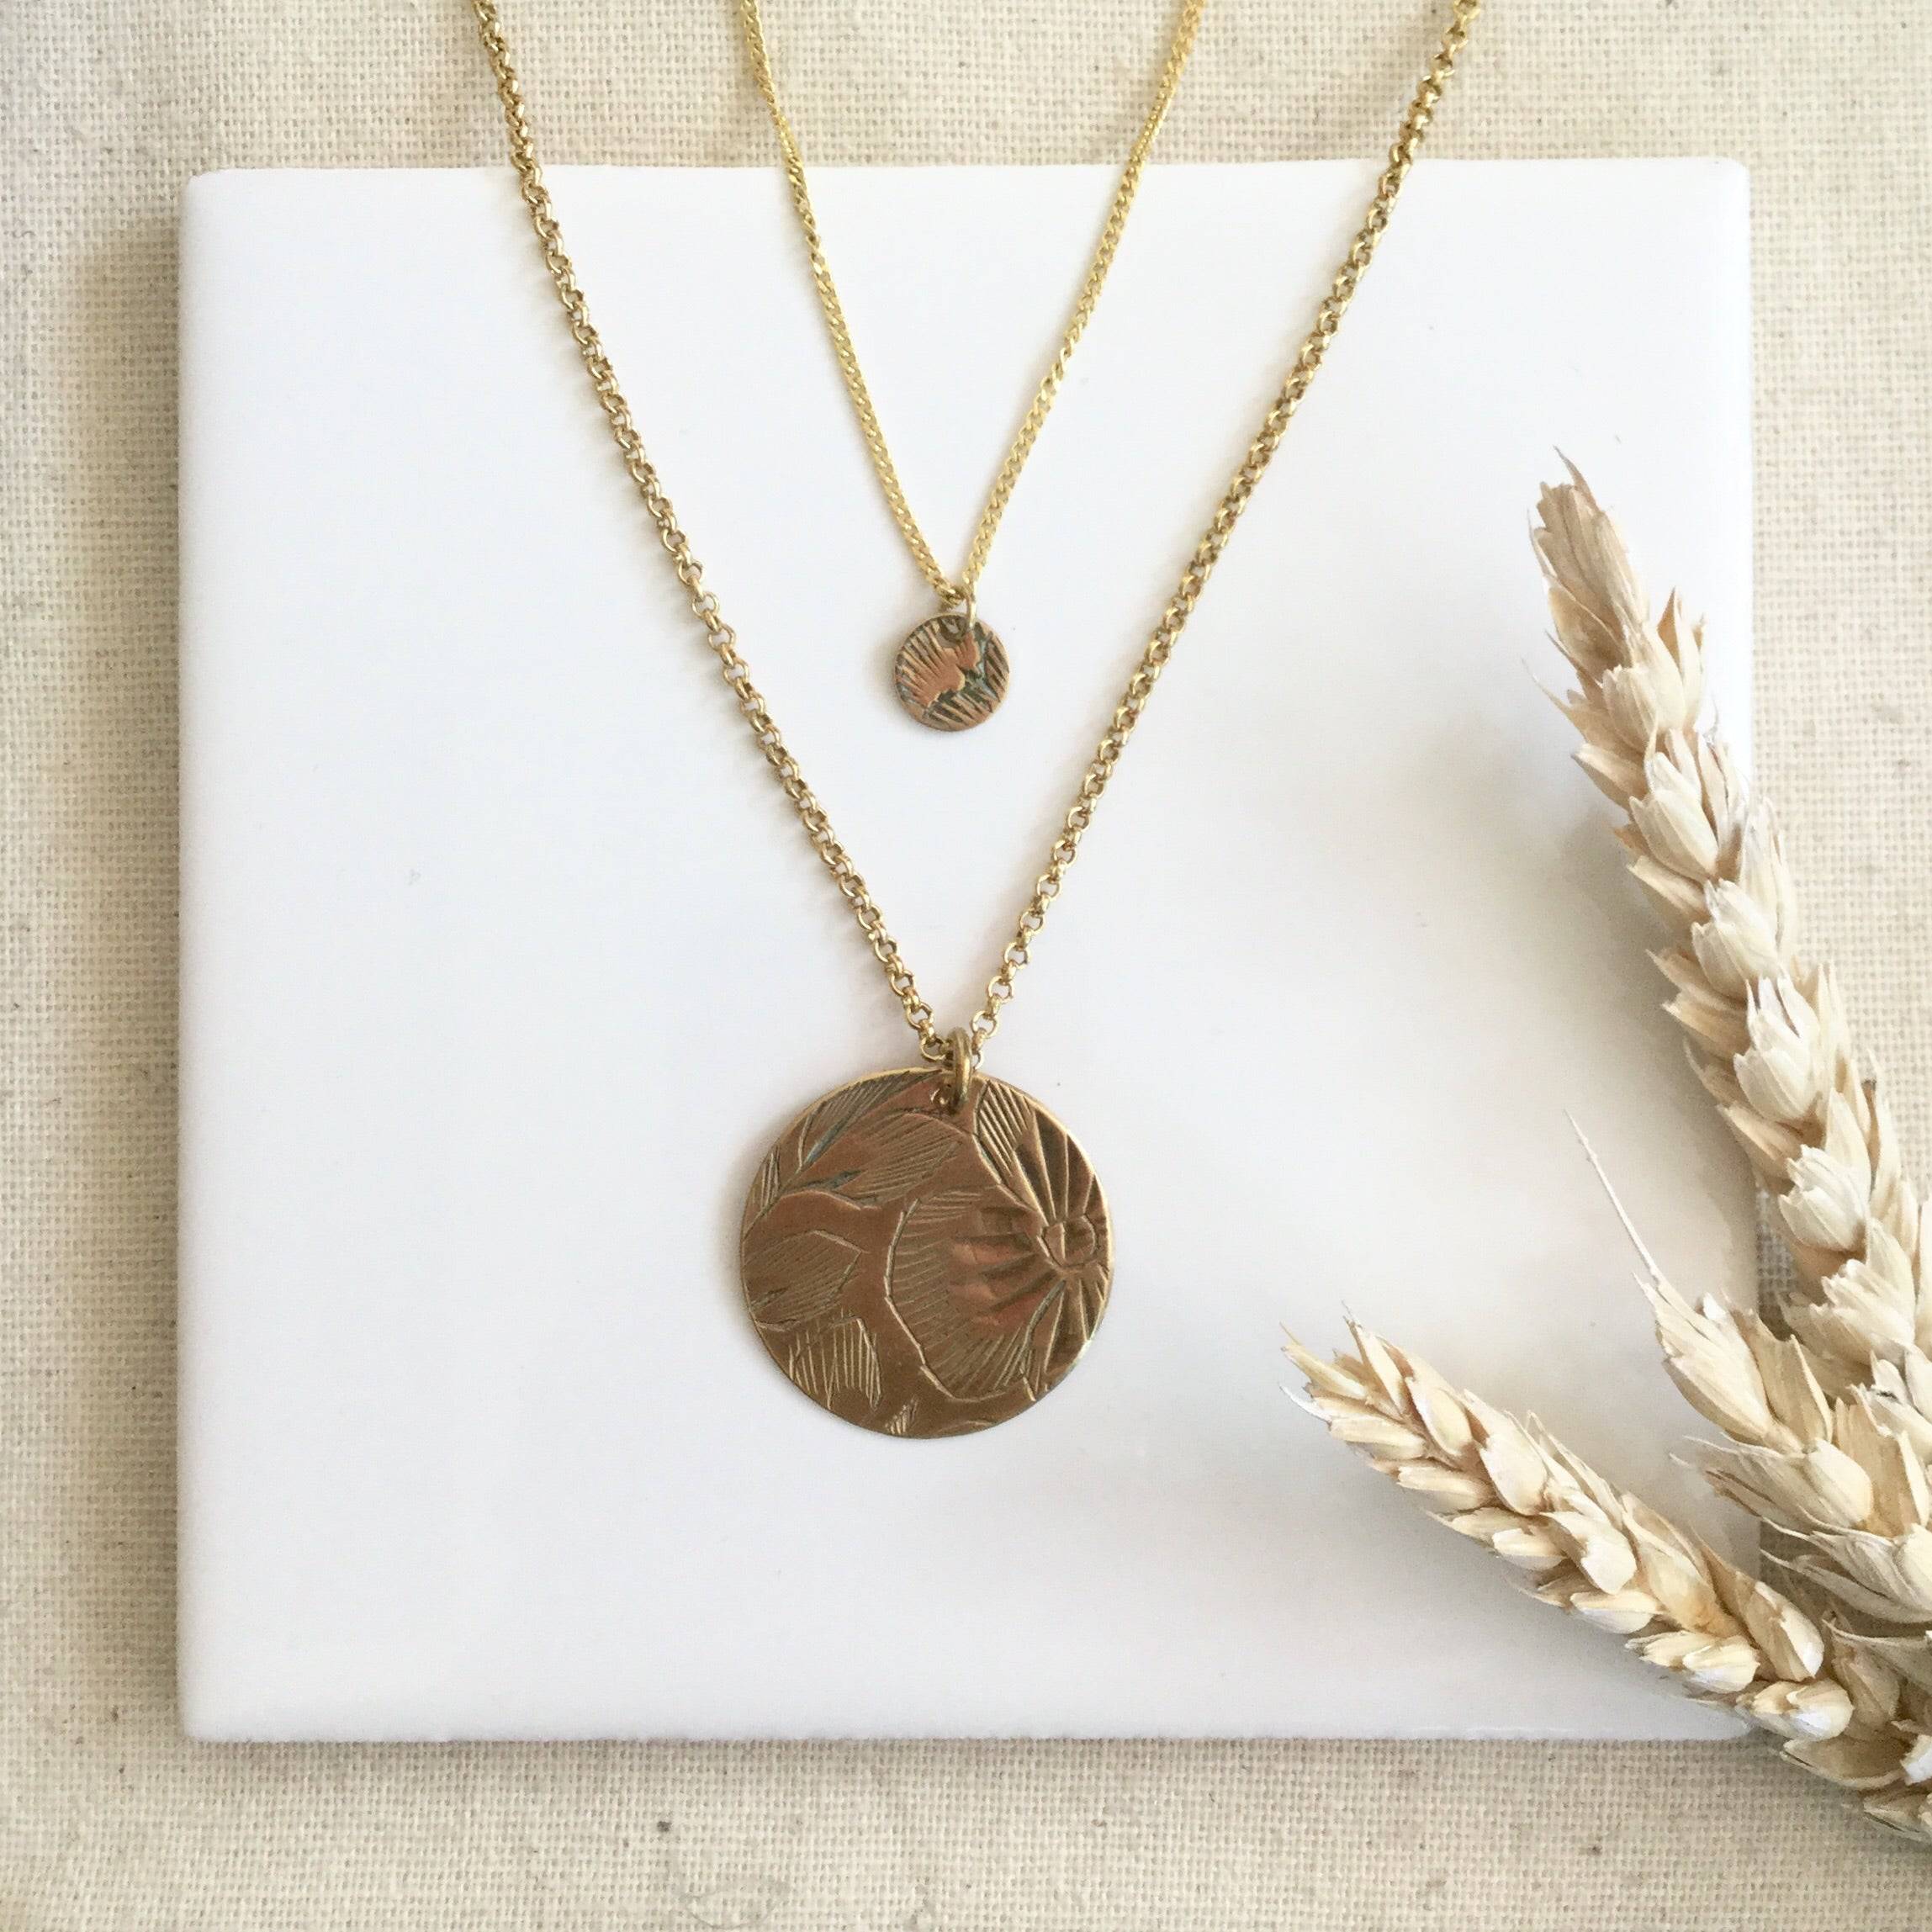 NECKLACE VINTAGE COIN 24" CHAIN - Out of the Blue